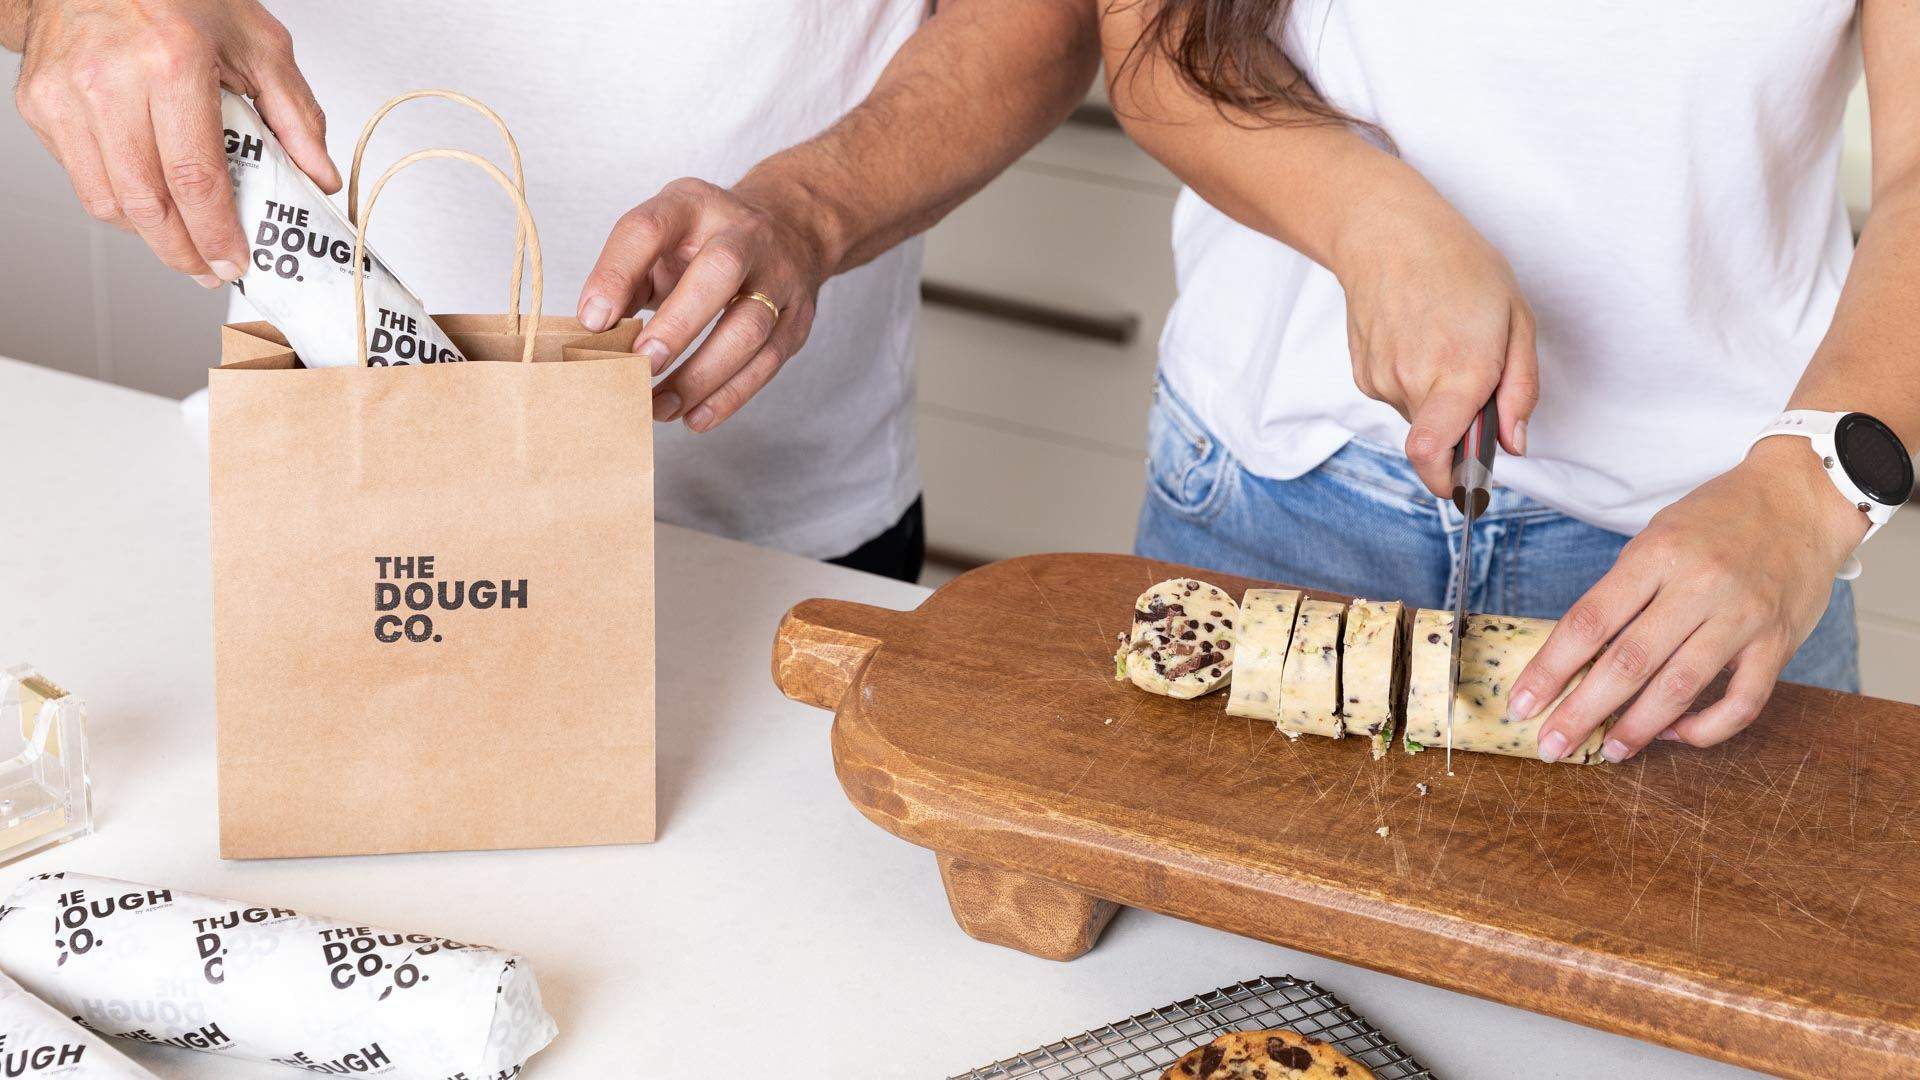 Makin' Dough: How a Melbourne Law Student Used Lockdown to Launch a Ready-to-Bake Cookie Business